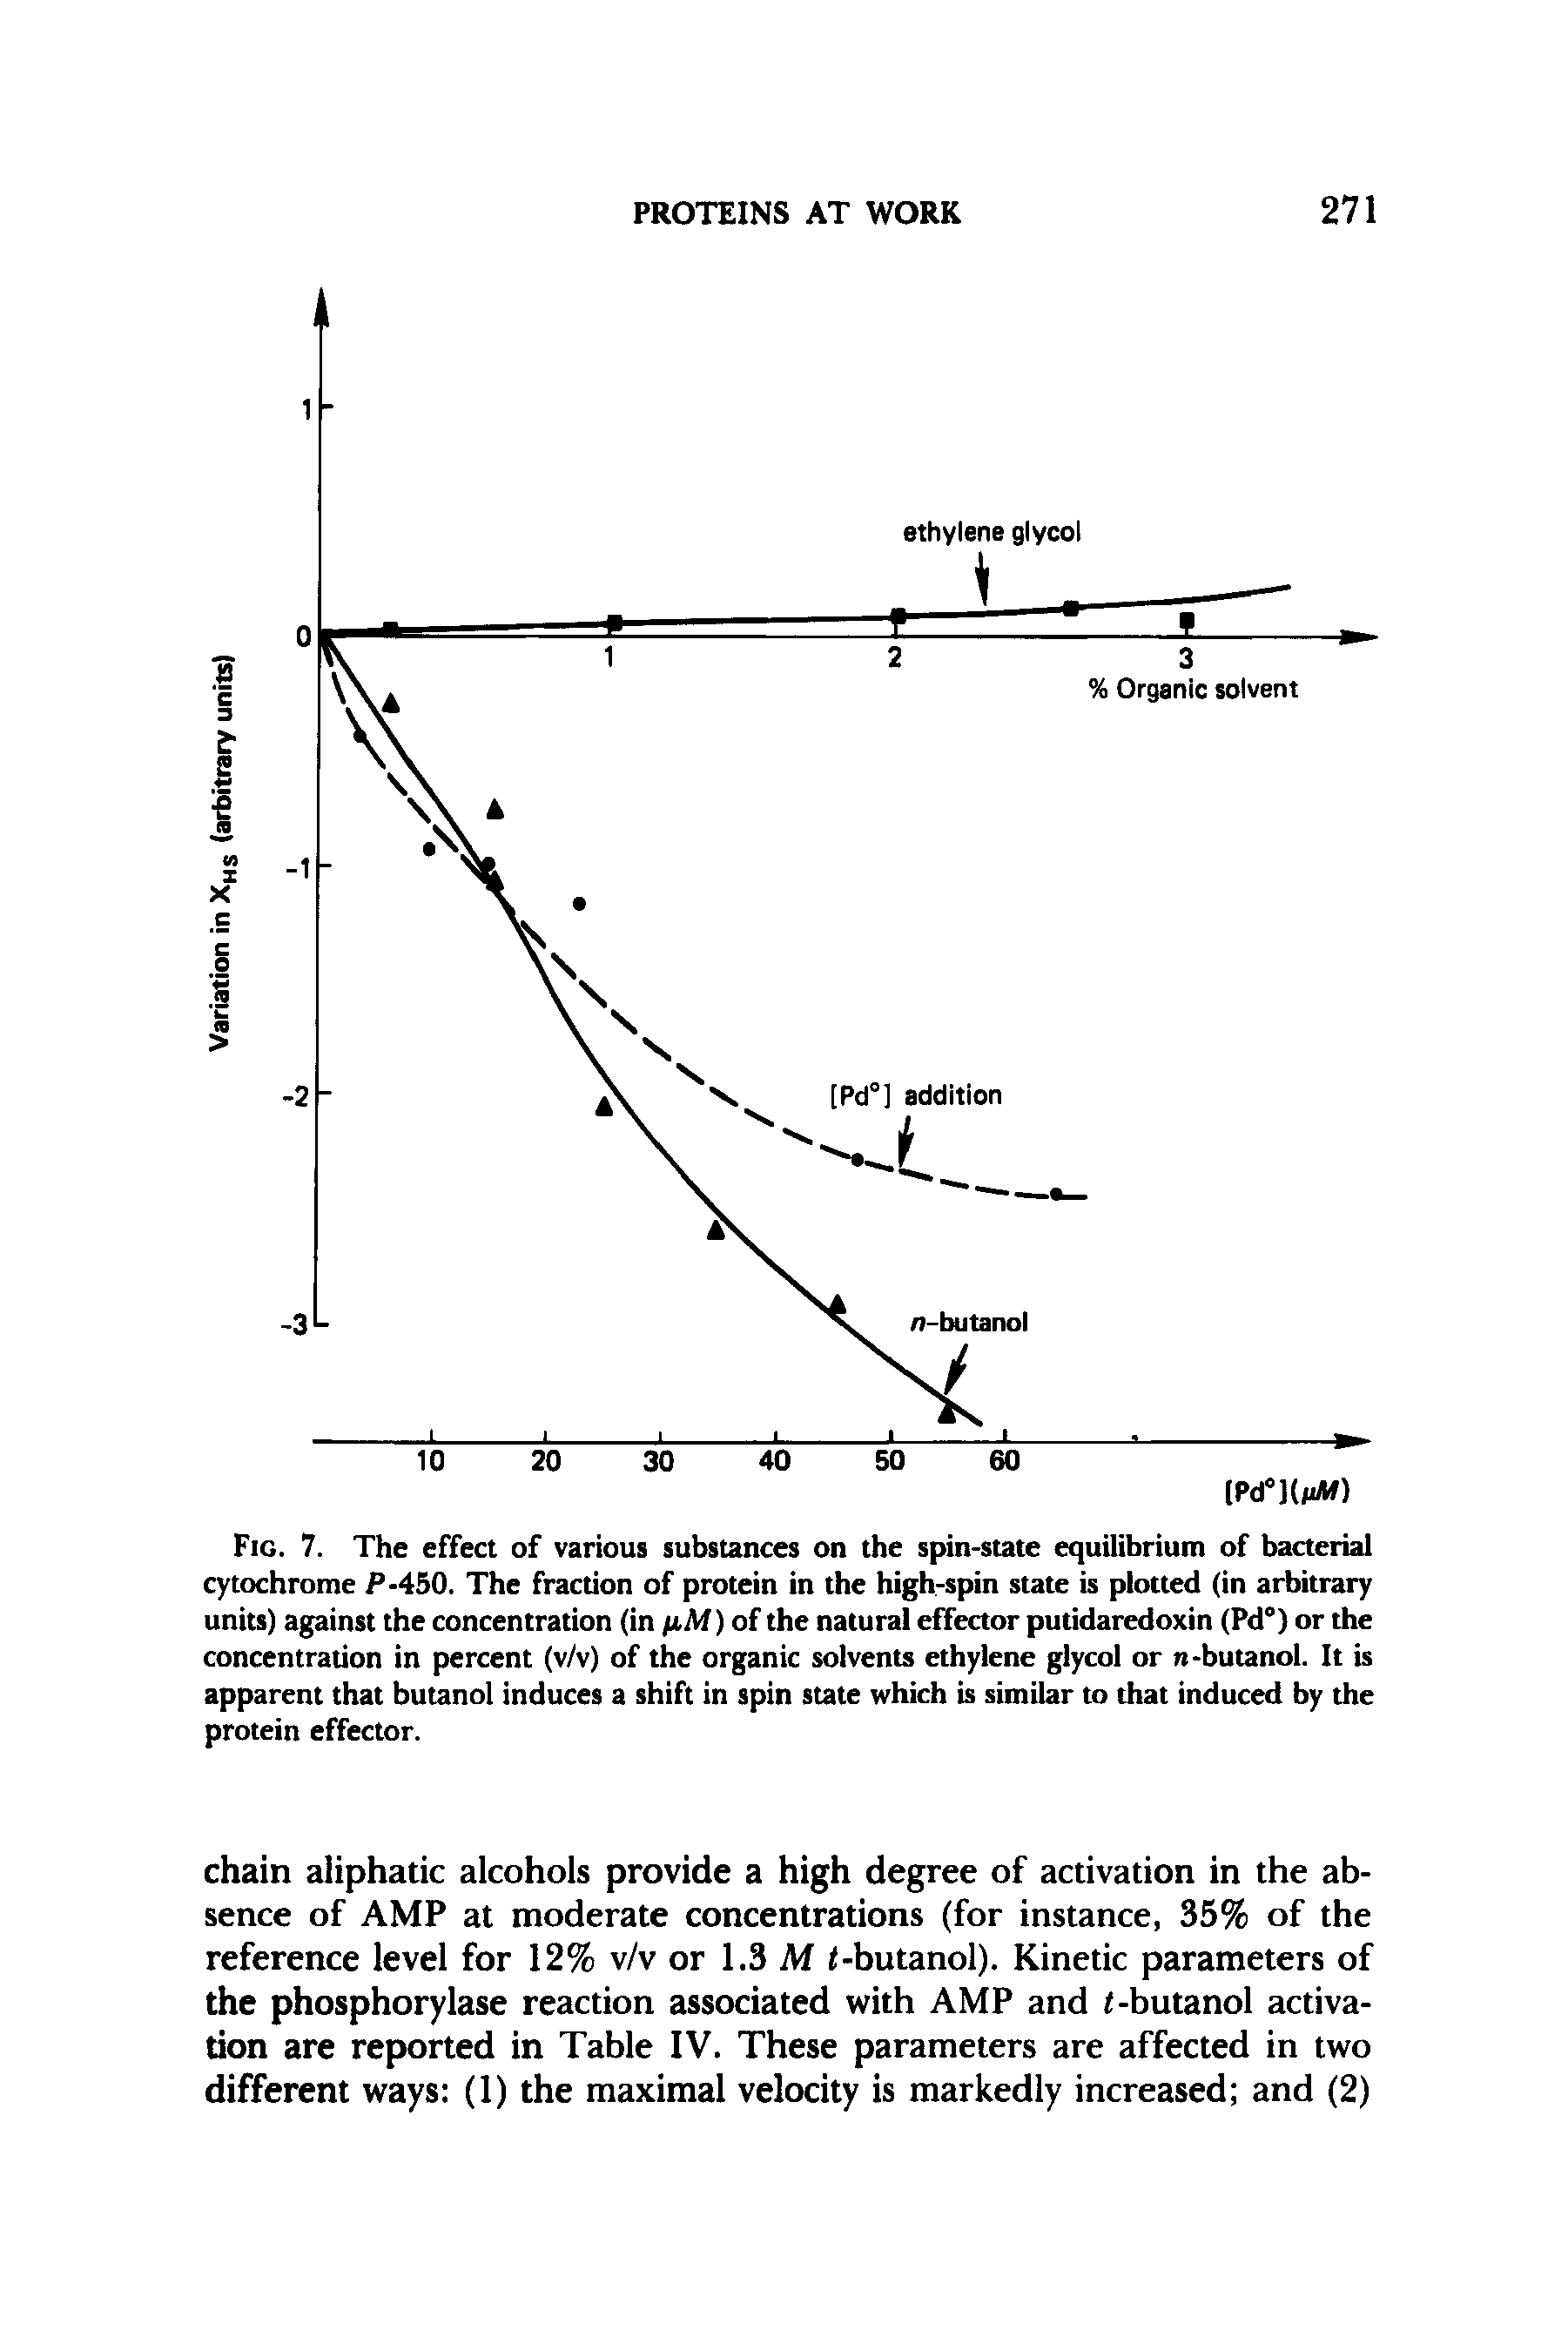 Fig. 7. The effect of various substances on the spin-state equilibriutn of bacterial cytochrome P-450. The fraction of protein in the high-spin state is plotted (in arbitrary units) against the concentration (in fiM) of the natural effector putidaredoxin (Pd°) or the concentration in percent (v/v) of the organic solvents ethylene glycol or n-butanol. It is apparent that butanol induces a shift in spin state which is similar to that induced by the protein effector.